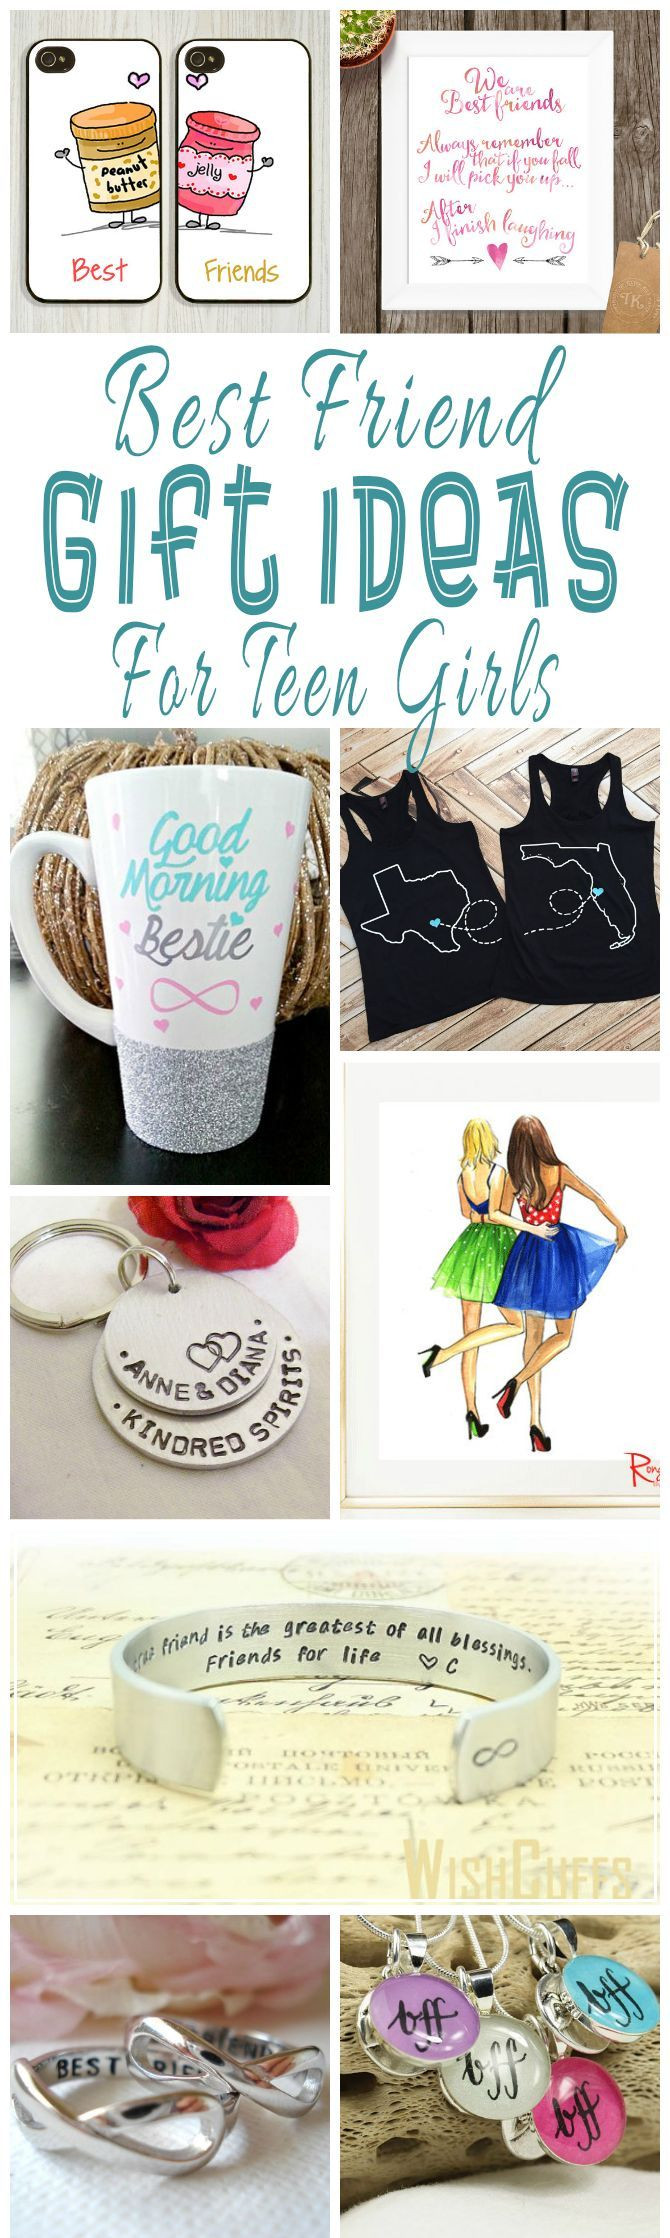 Unique Gift Ideas For Best Friend
 Best Friend Gift Ideas For Teens